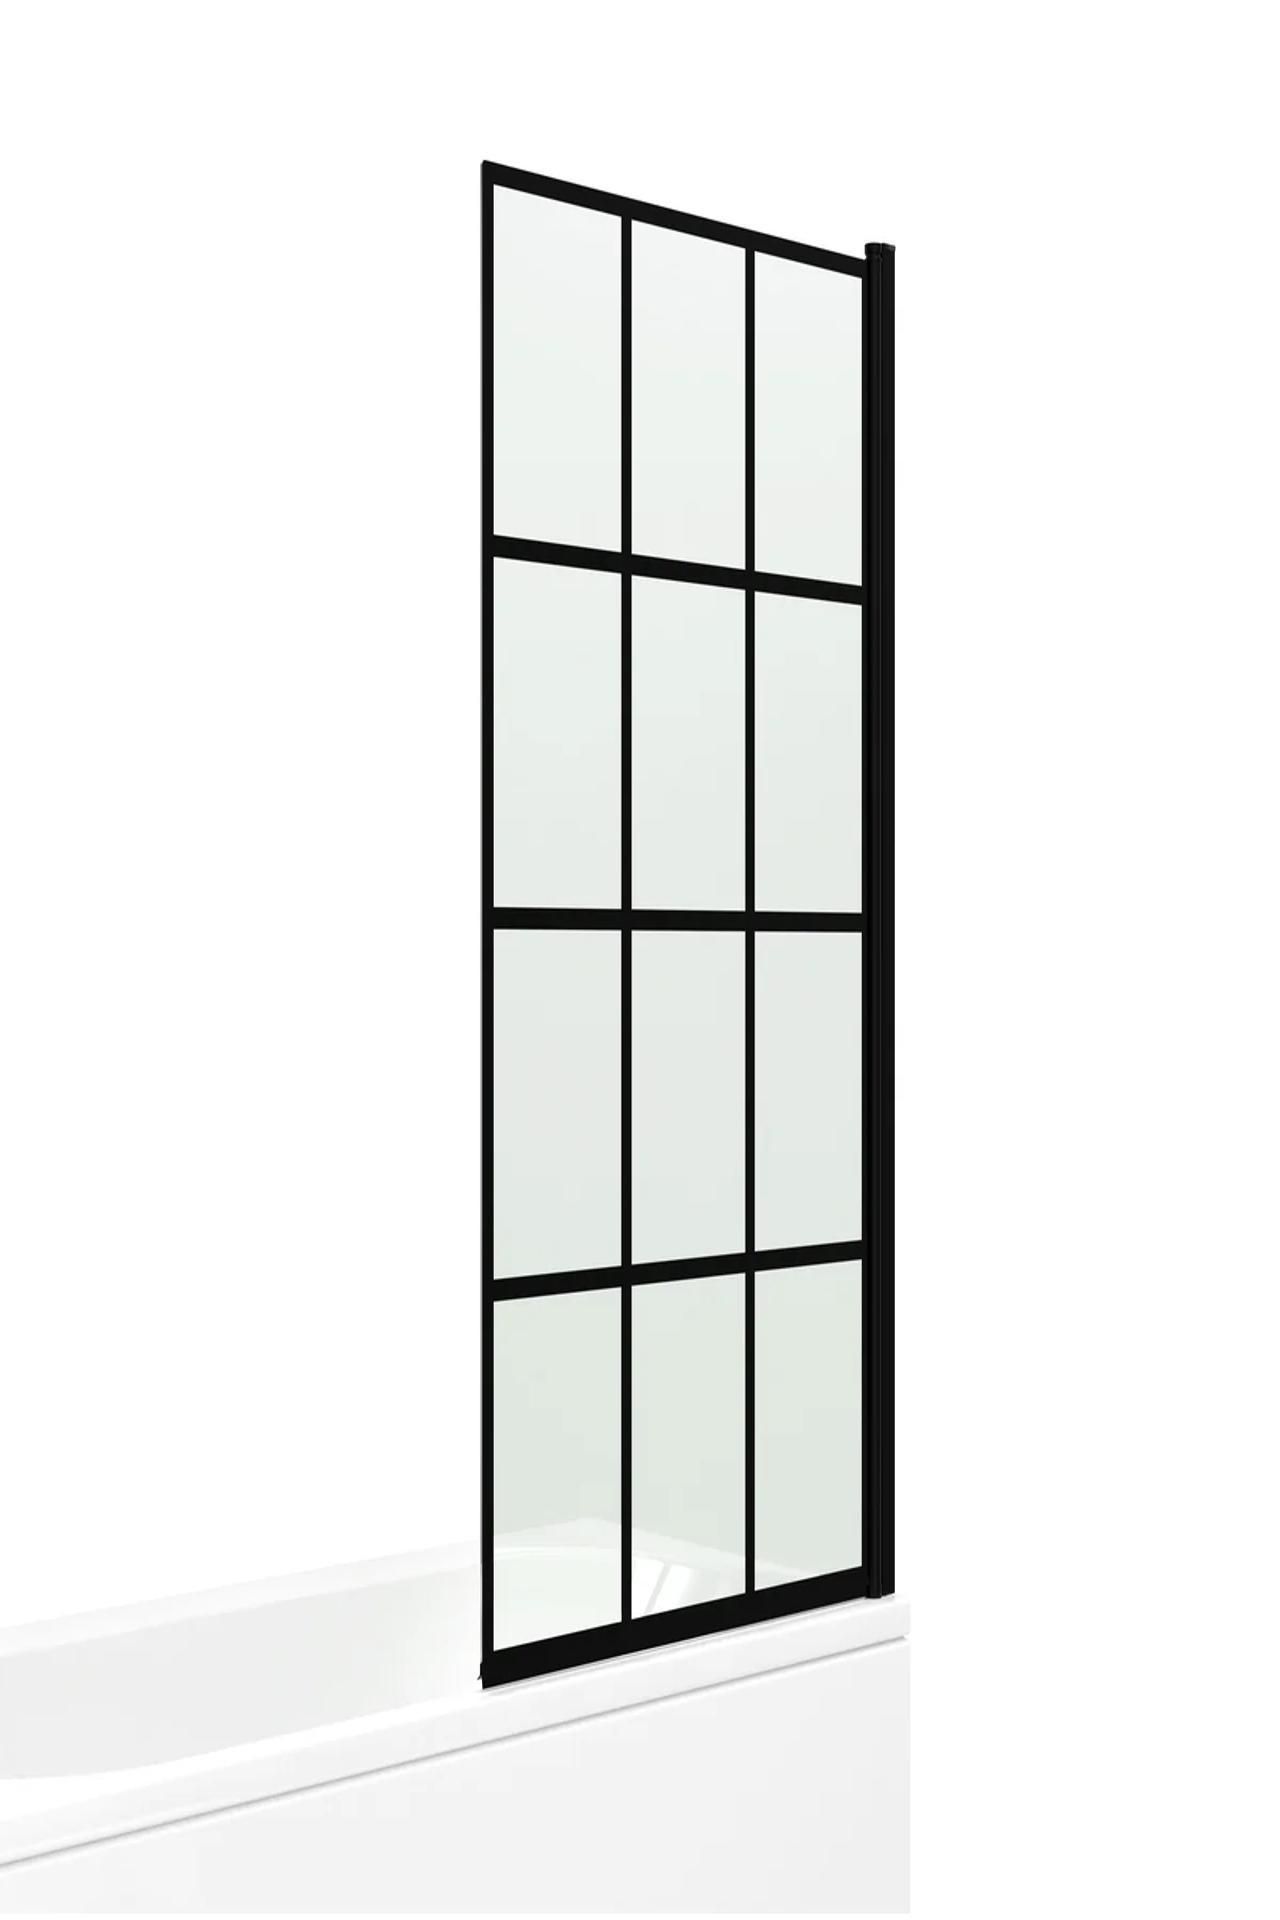 Black Crittall Folding Shower/Bath Screen, 1400mm x 800mm, Black Profile and Glass. As New.